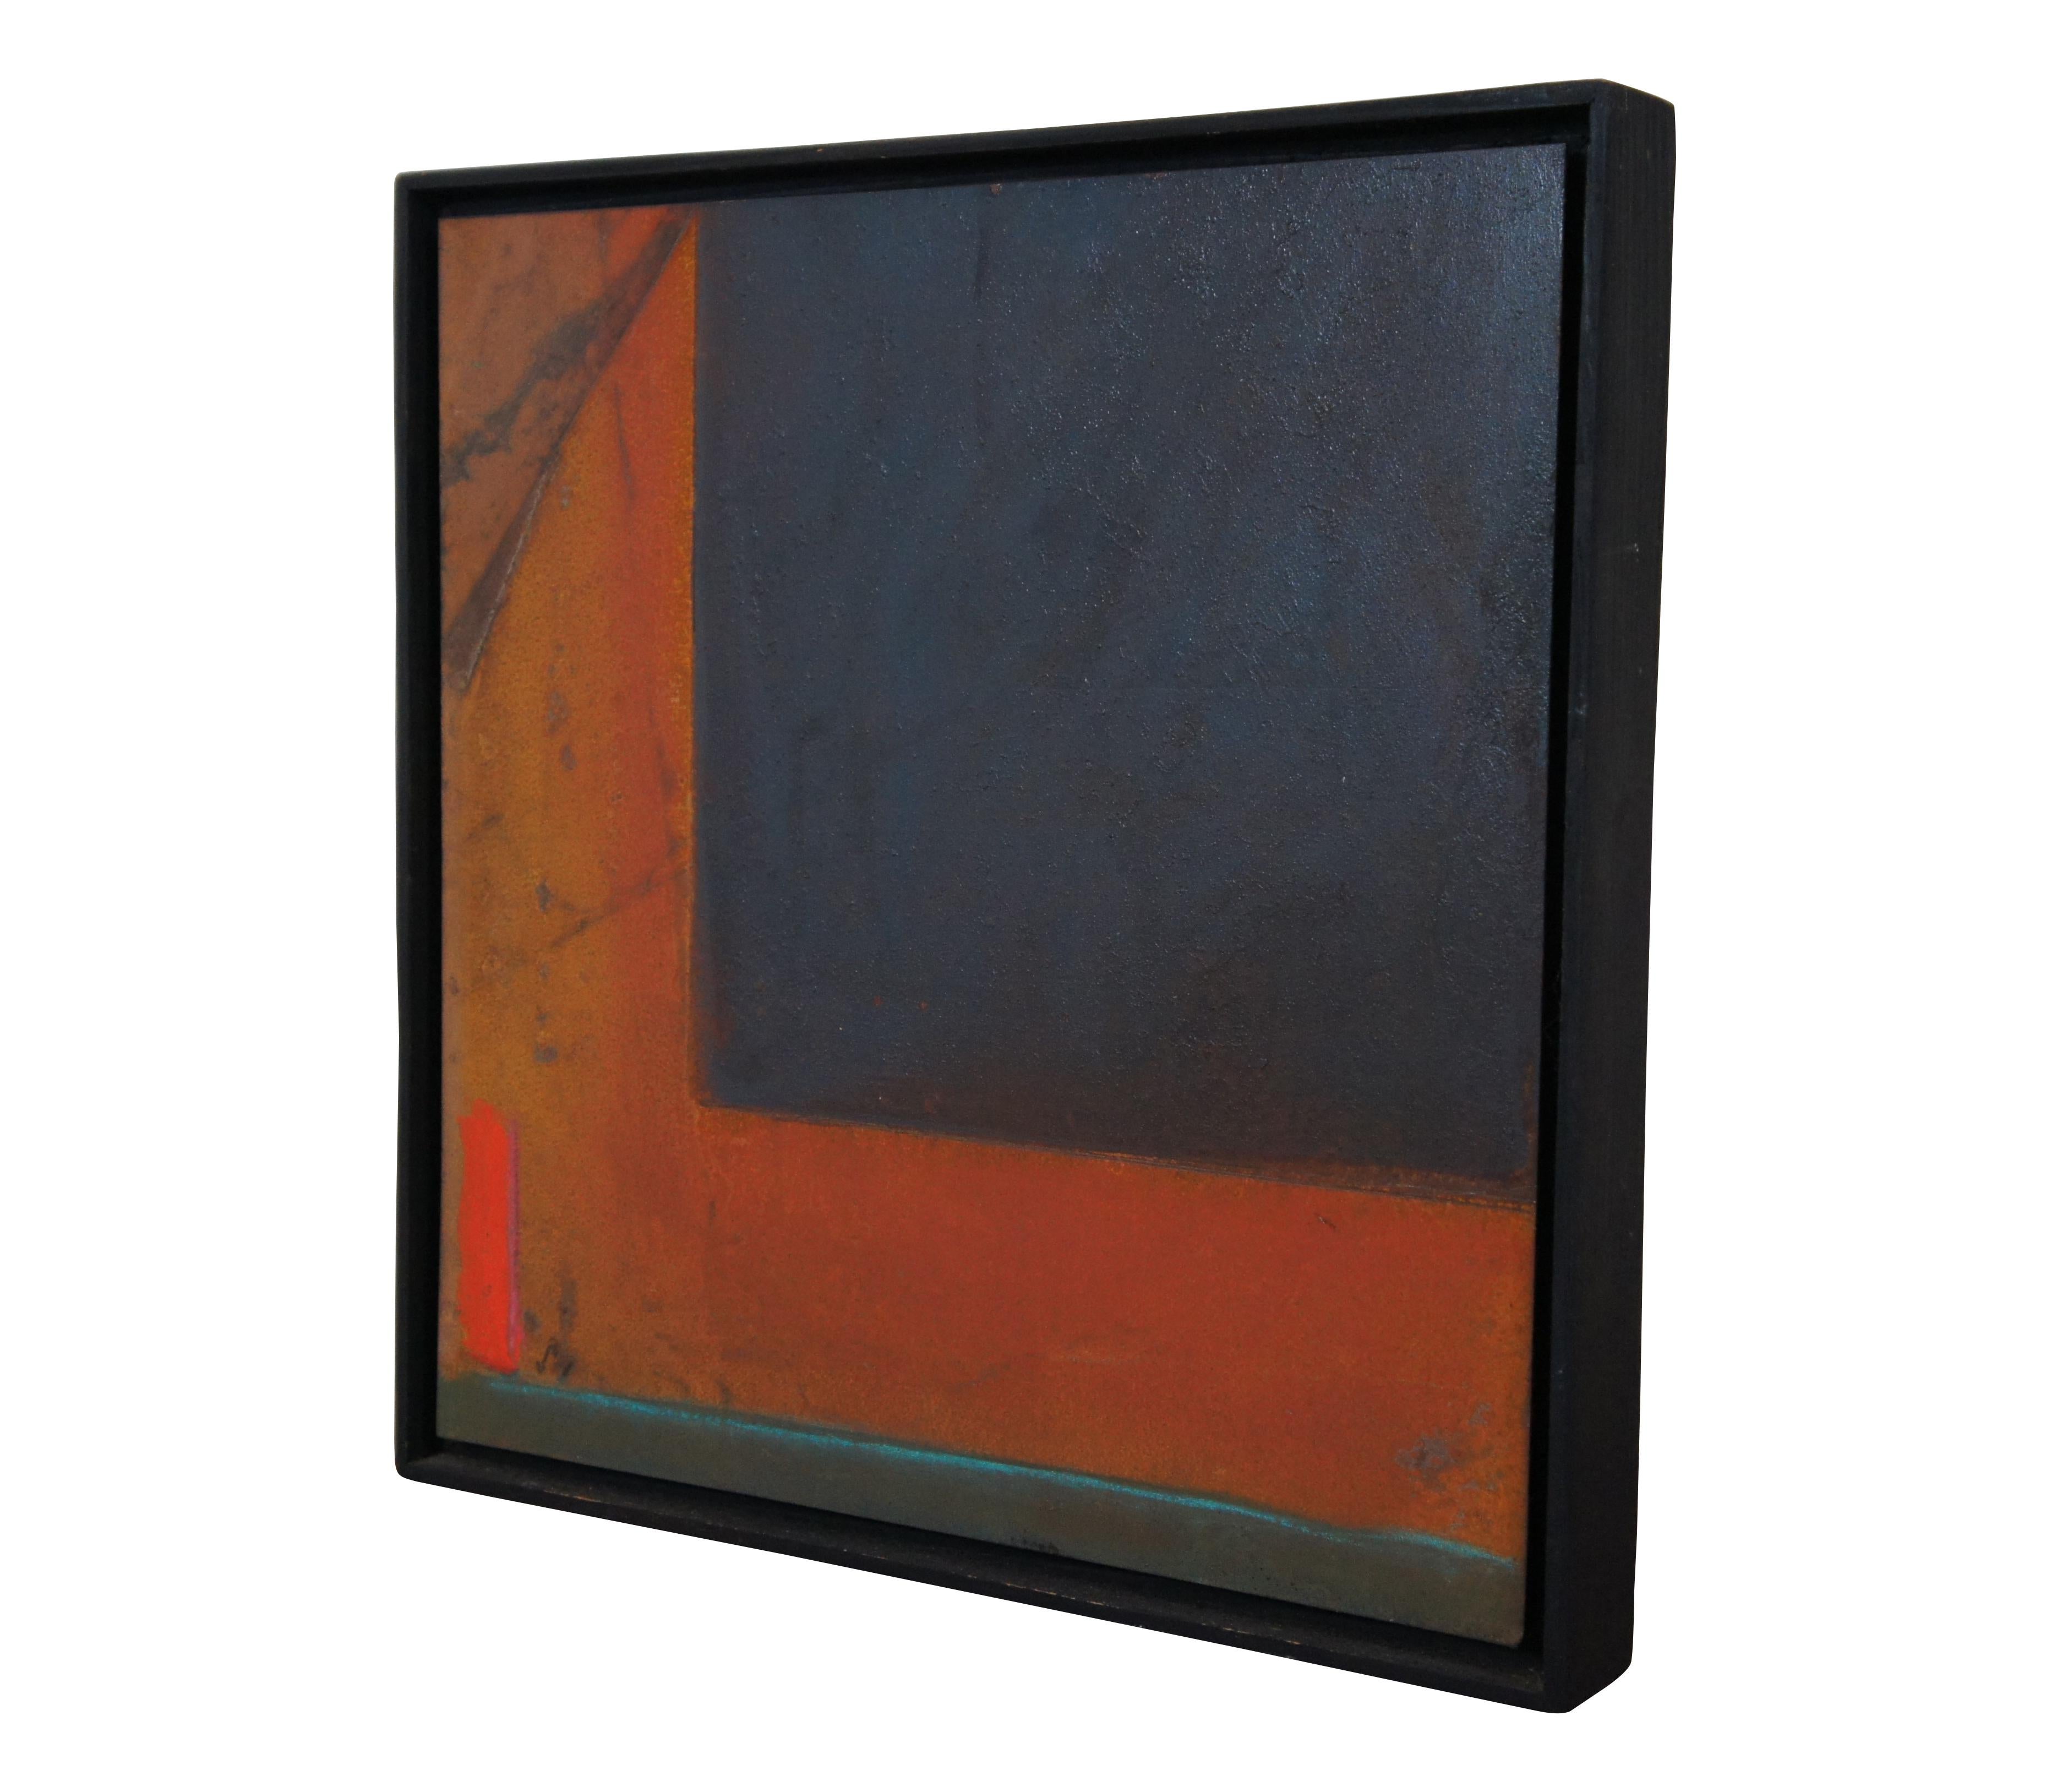 Modern abstract expressionist / cubist painting on metal featuring geometric blocks of orange and blue, set in a black shadowbox frame.

Measures: 16” x 1.75” x 16.25” / Sans Frame - 15” x 15.25” (Width x Depth x Height)